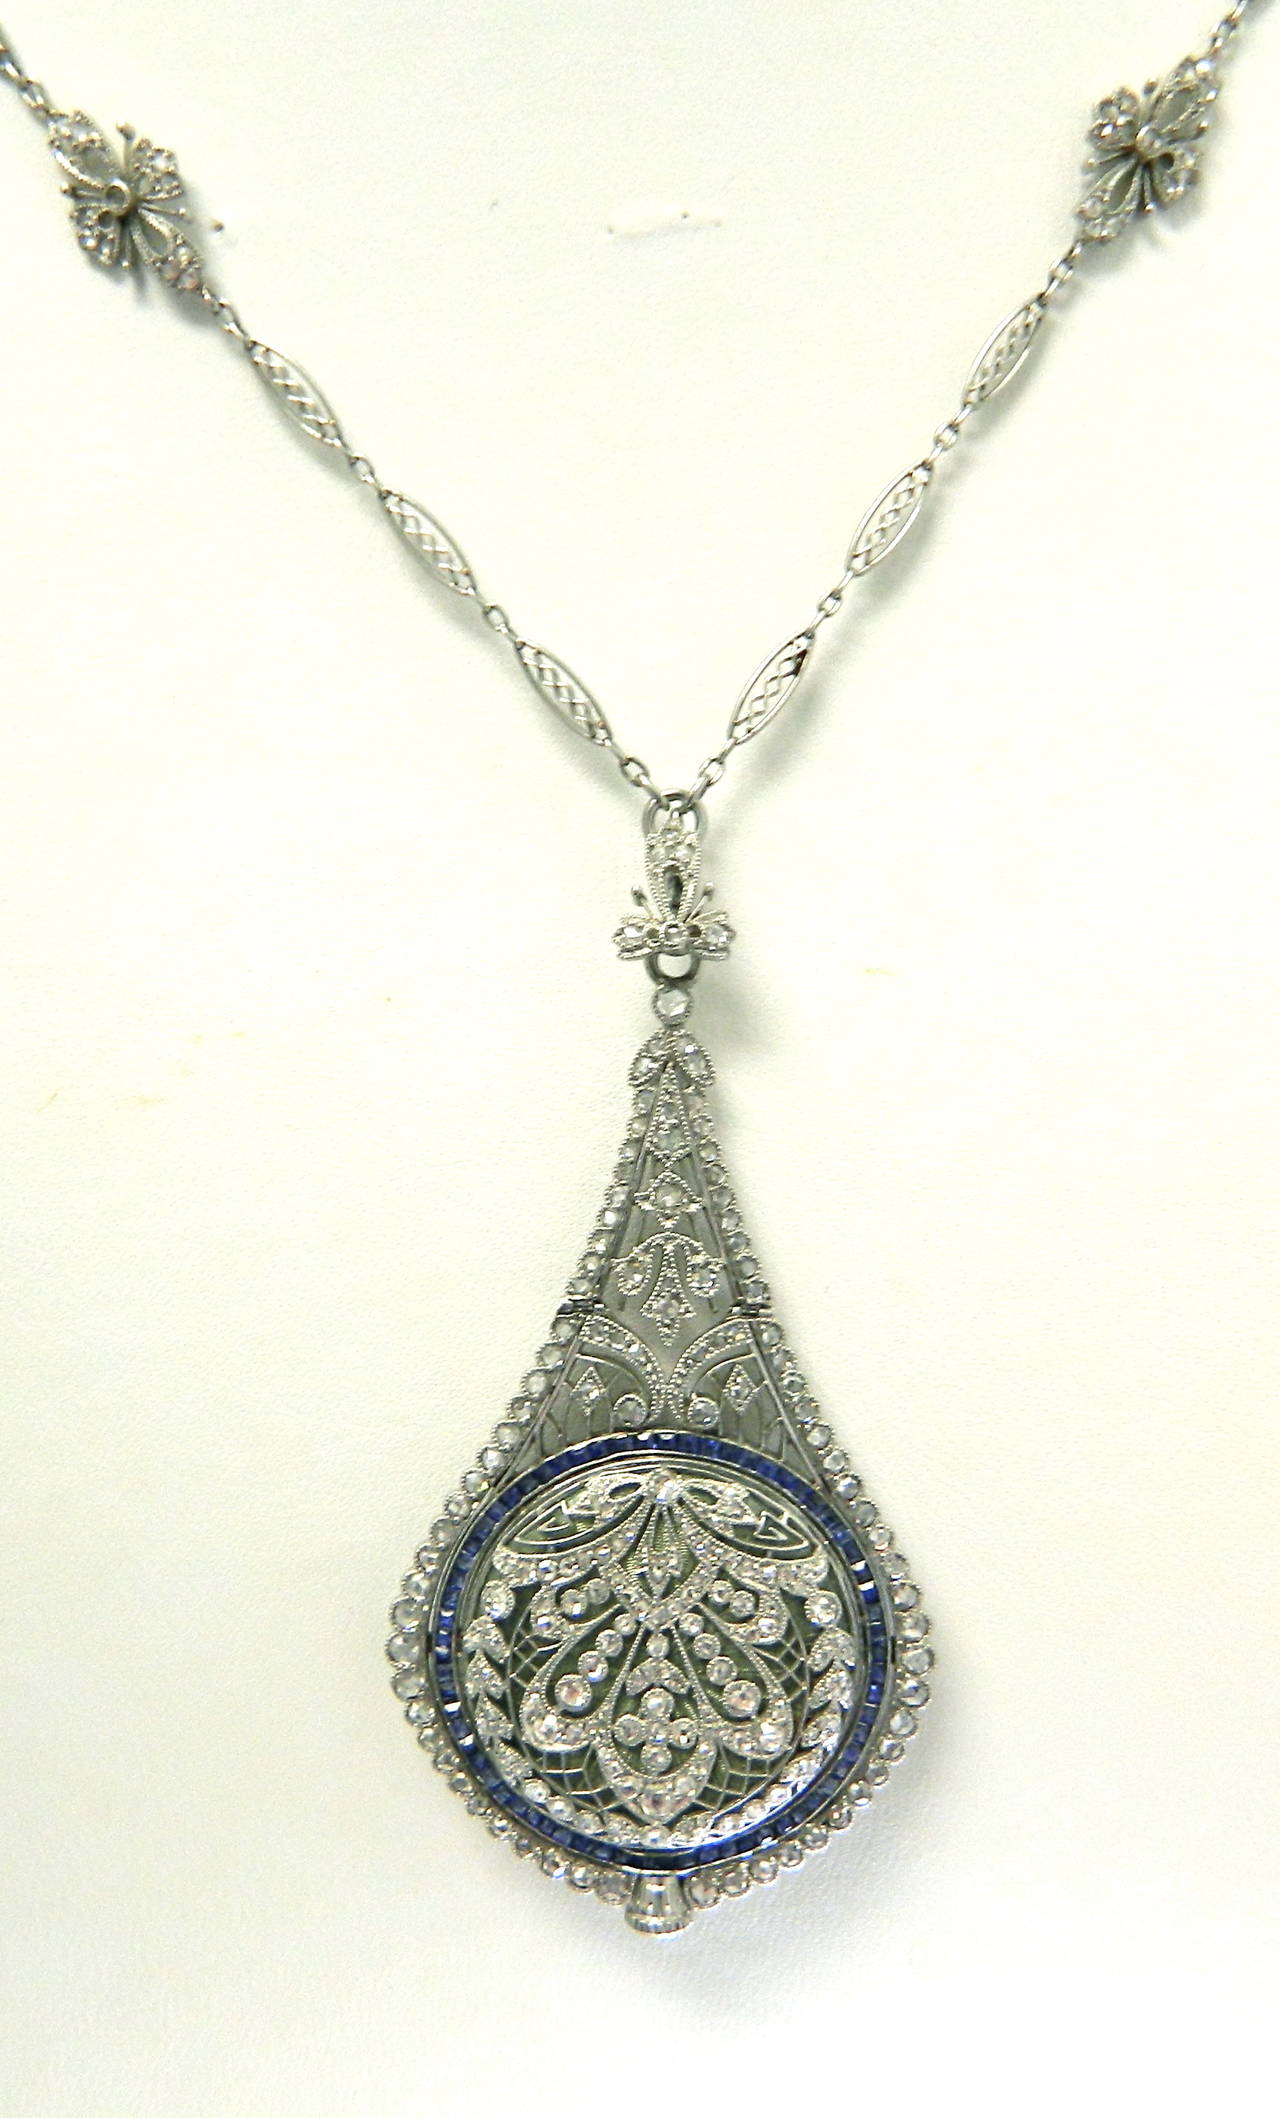 An exquisite Belle Epoque platinum, diamond and sapphire watch pendant by C.H. Meylan. Retailed by J.R. Reed & Co.  Original fitted box.